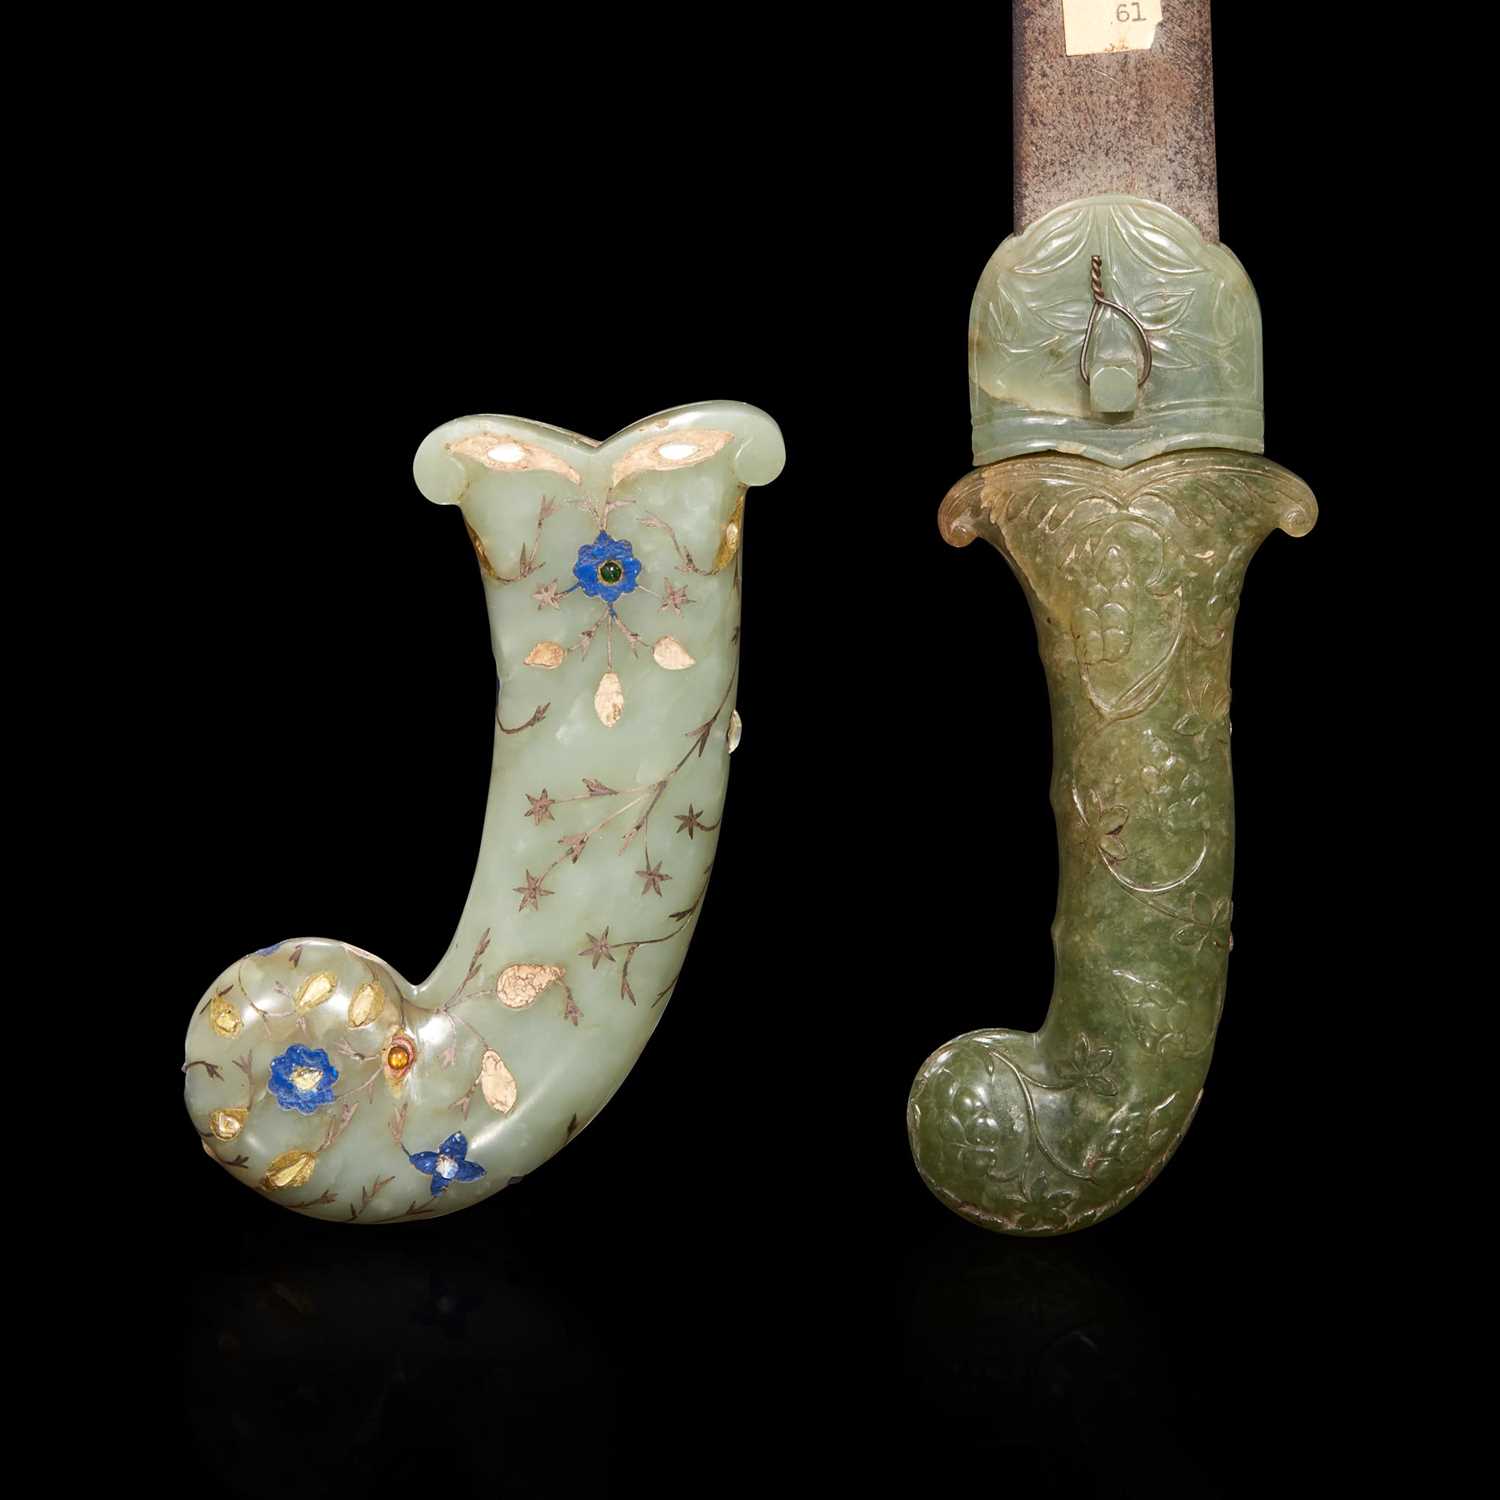 Lot 196 - A Mughal style blade with nephrite hilt and associated chape, and a Mughal style nephrite hilt